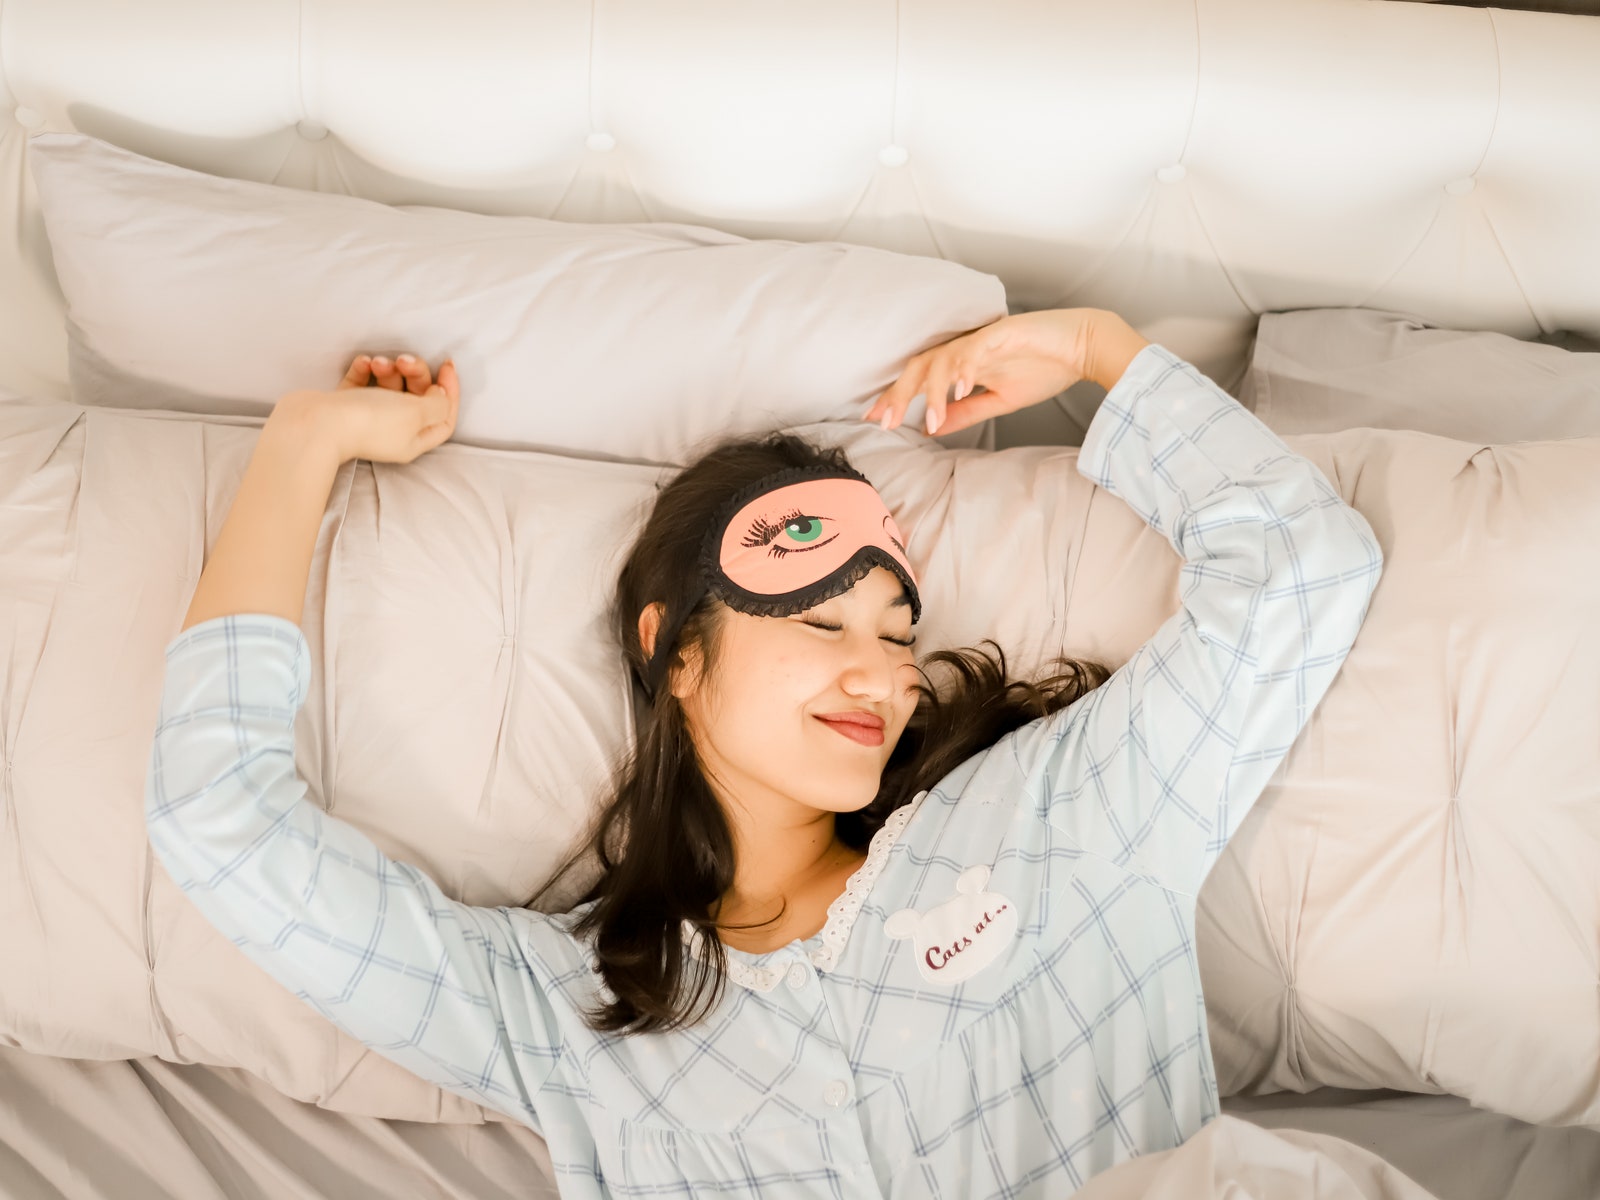 Not Getting 8 Hours of Sleep? This Wellness Hack Could Make Up for It